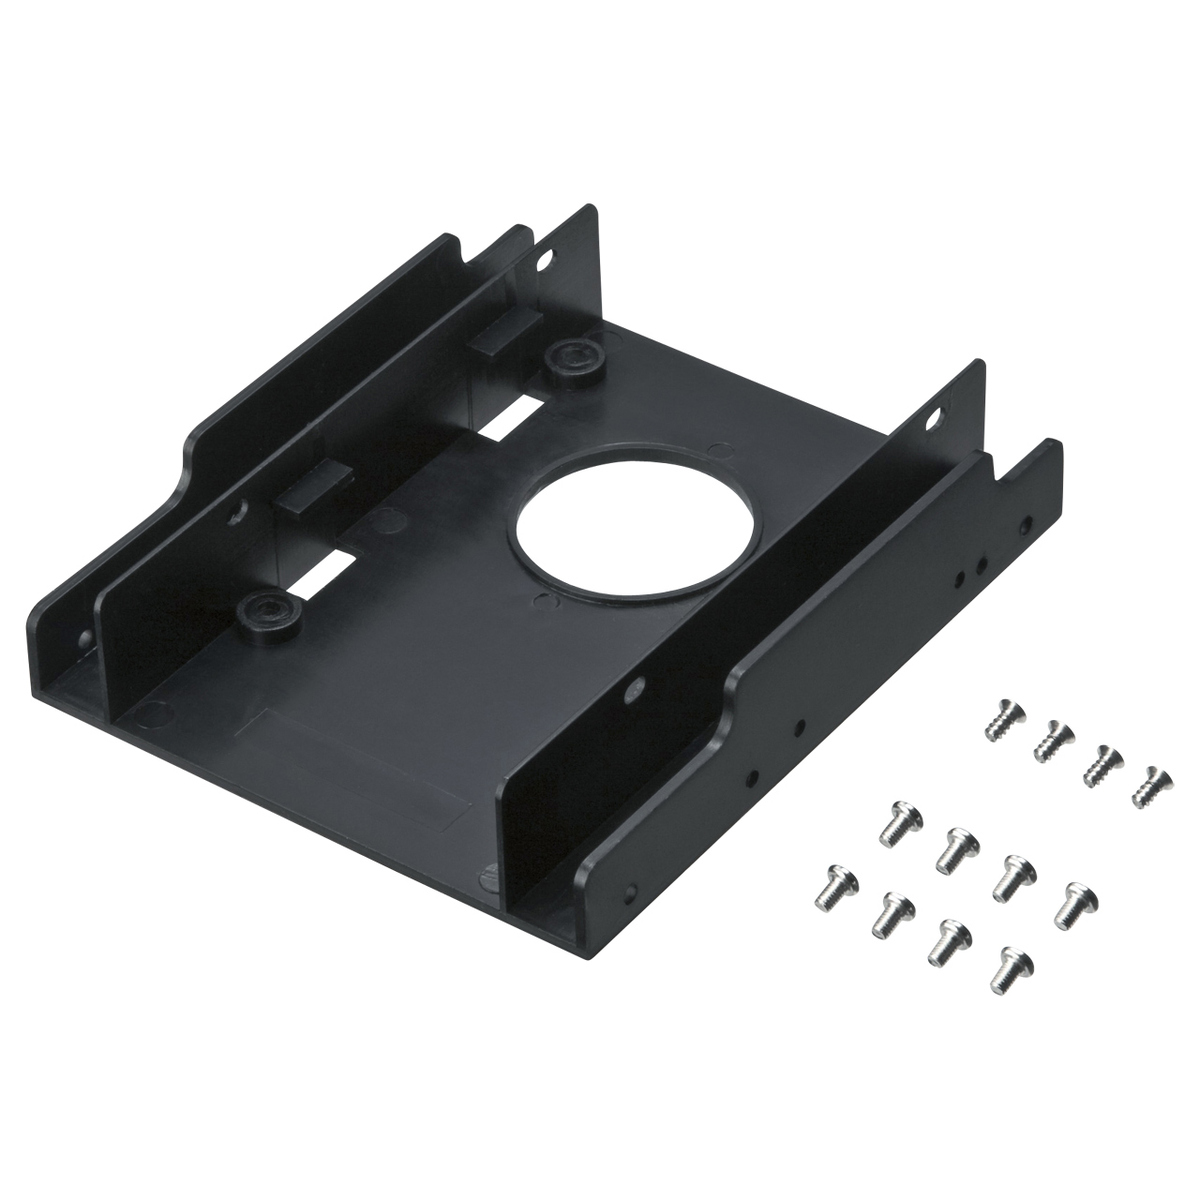 2.5 Inch HDD Conversion Mounter (for 2 machines)